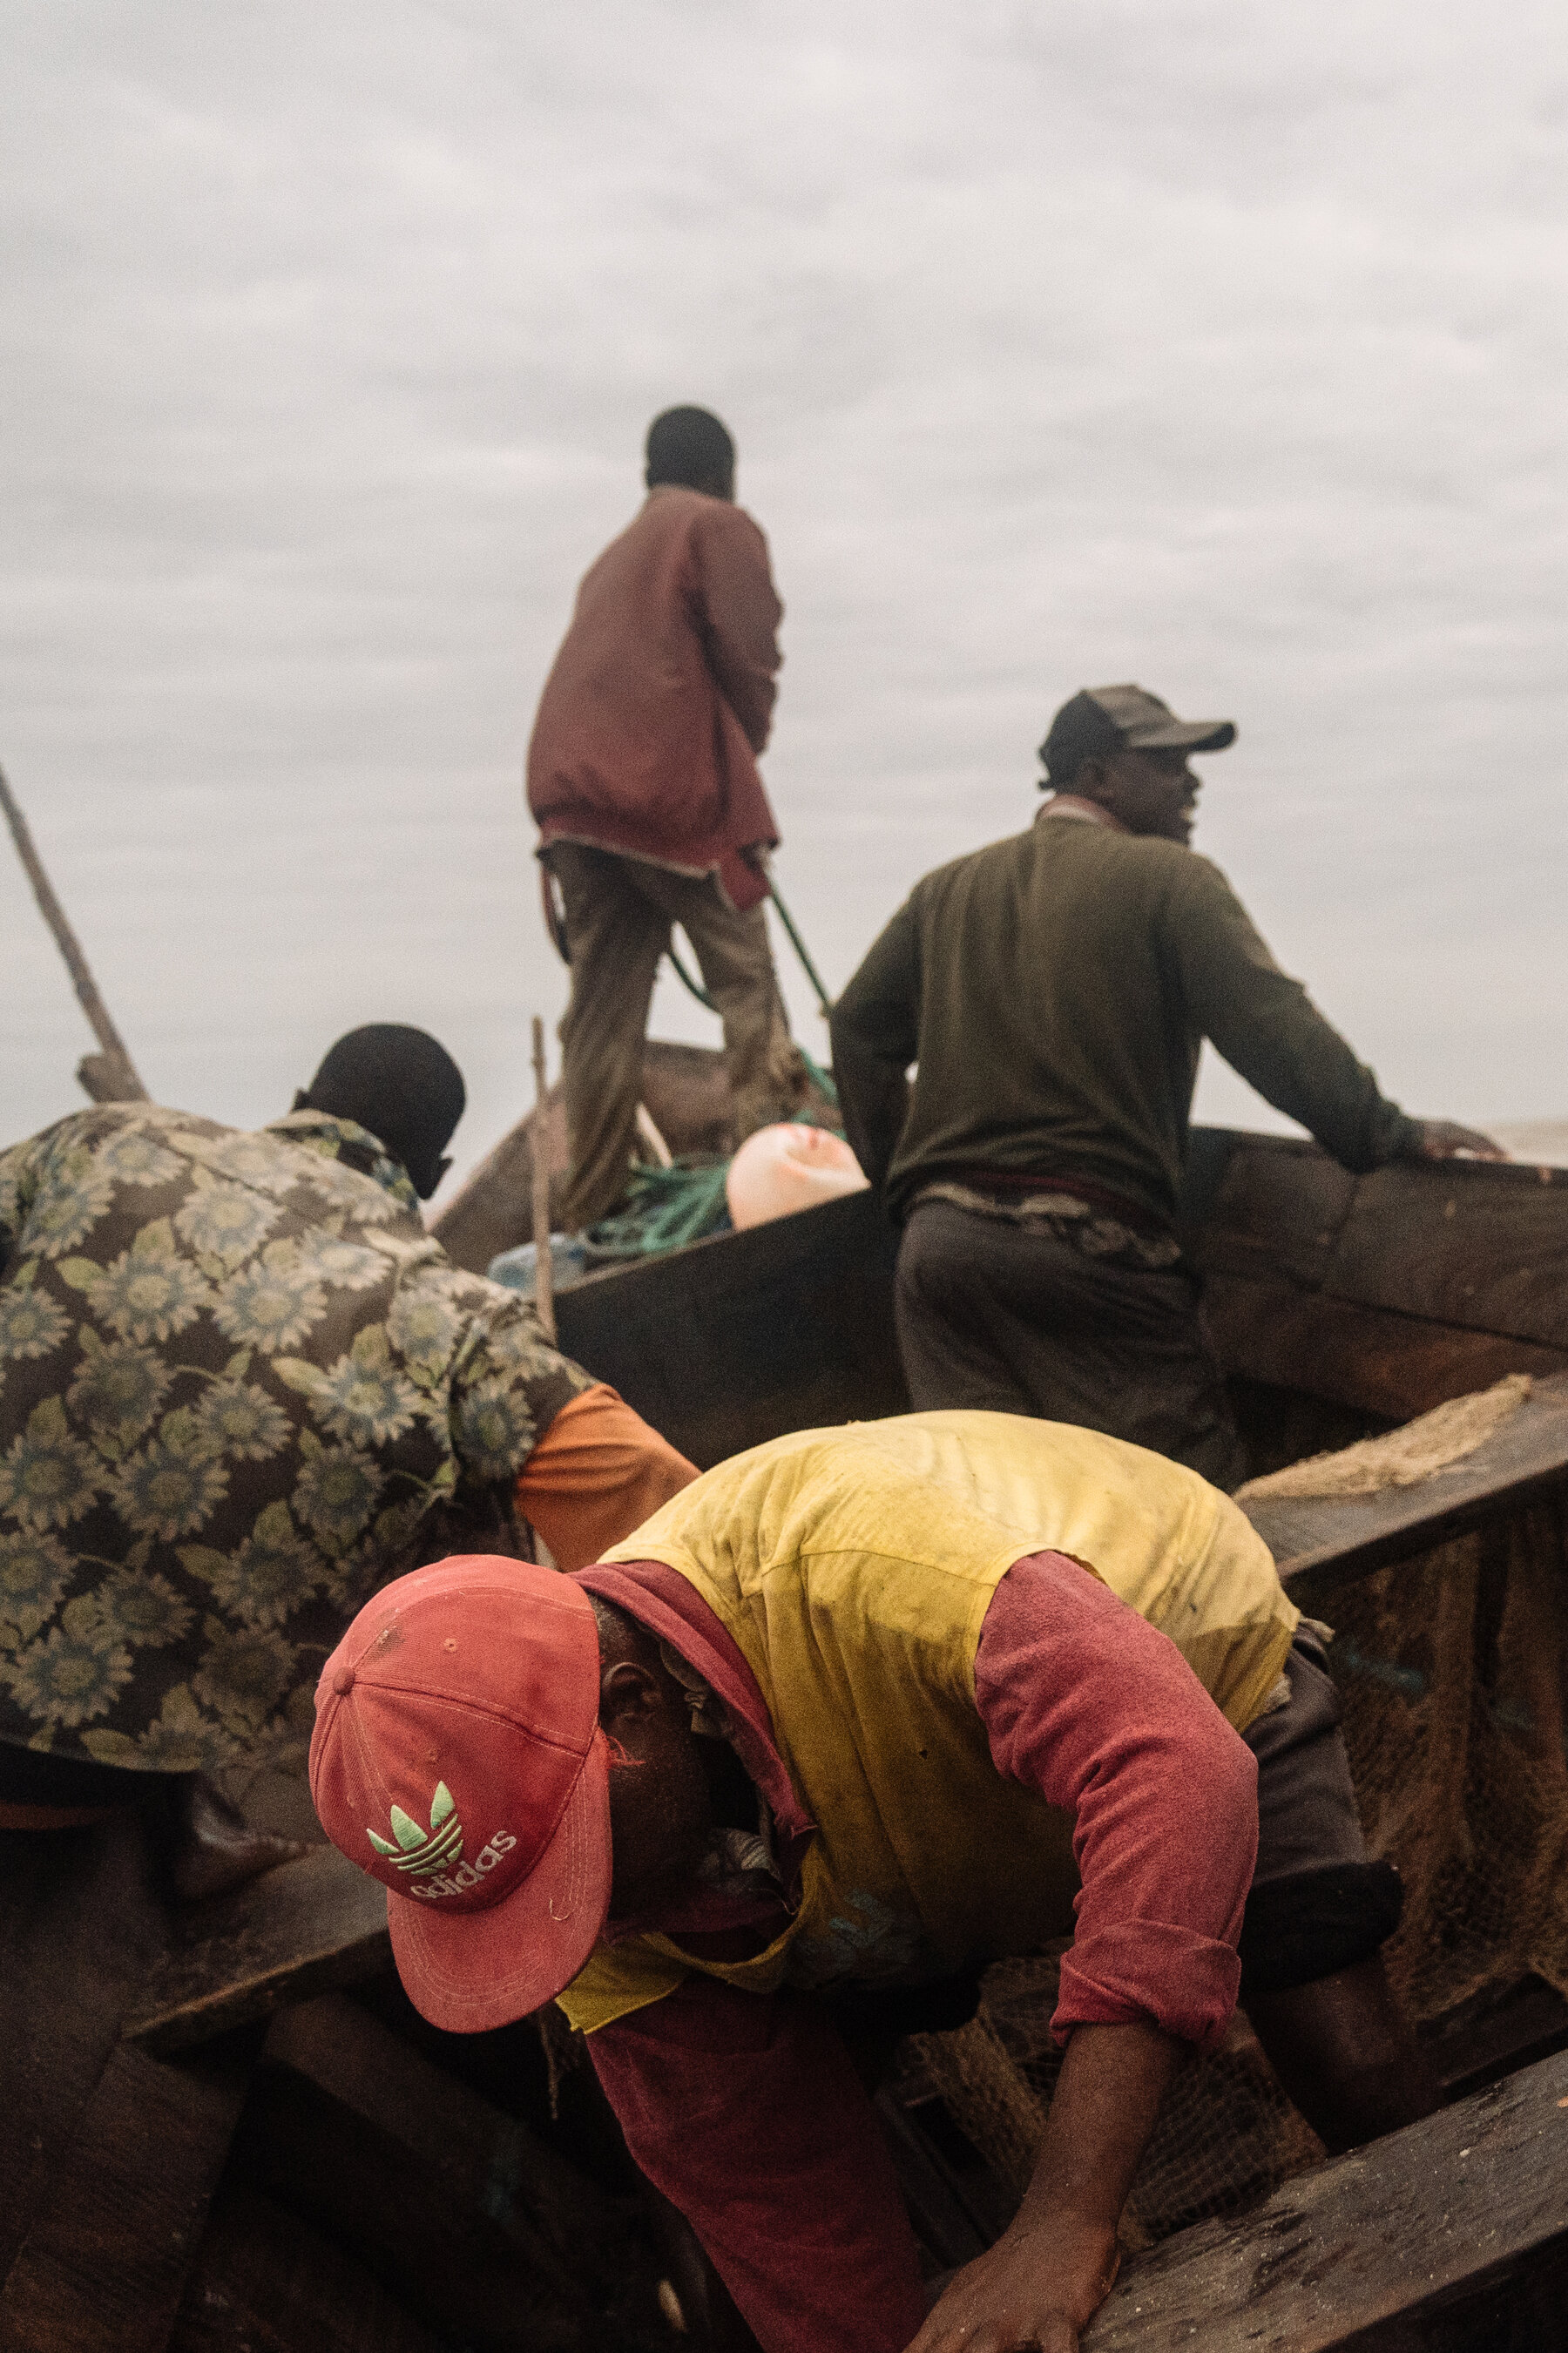 Five fishermen working in a wooden boat on a gray sea under gray skies.